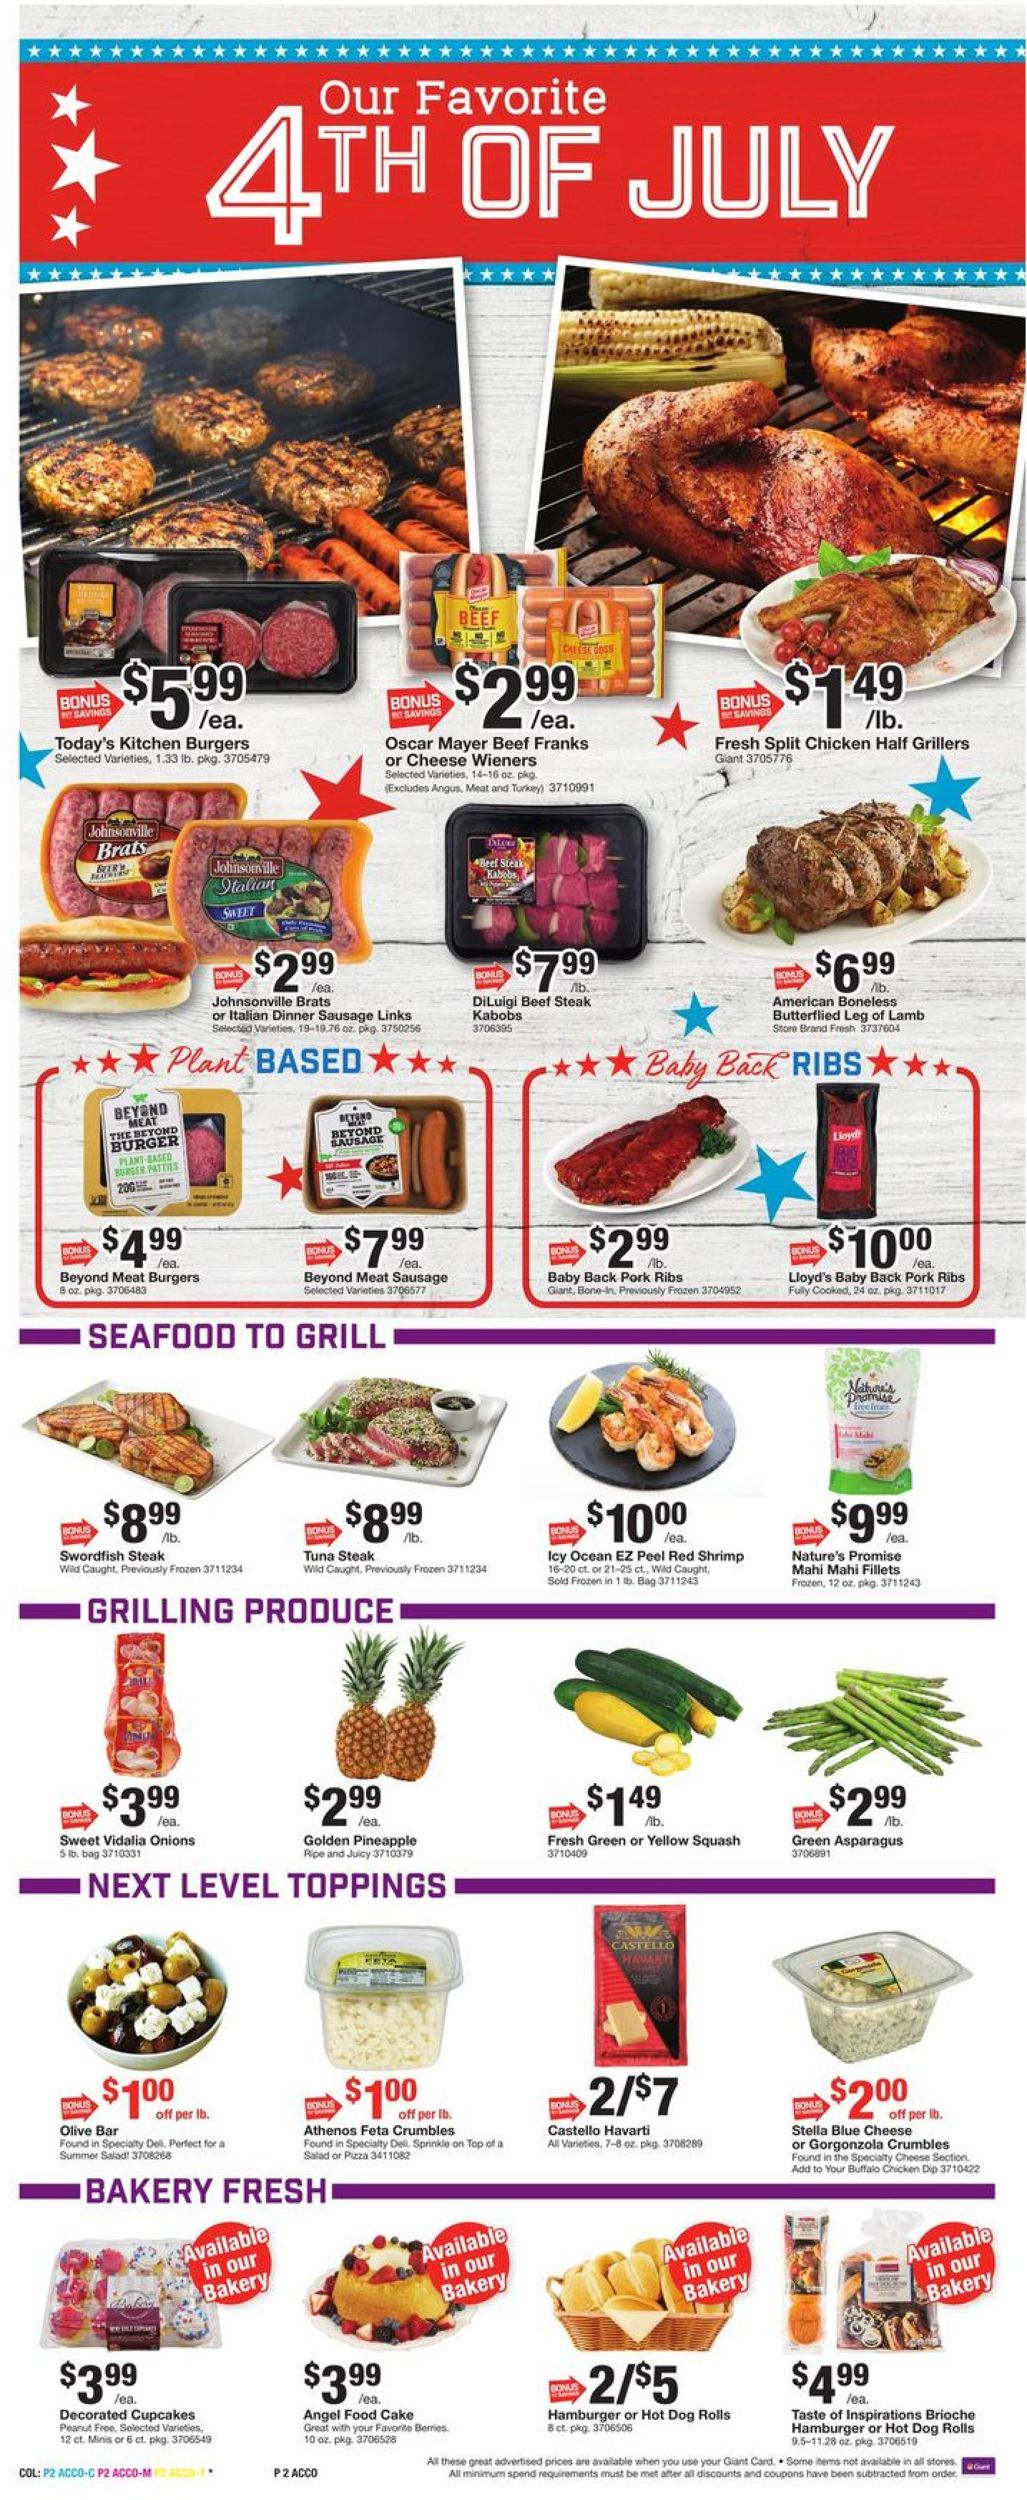 Catalogue Giant Food from 06/21/2019